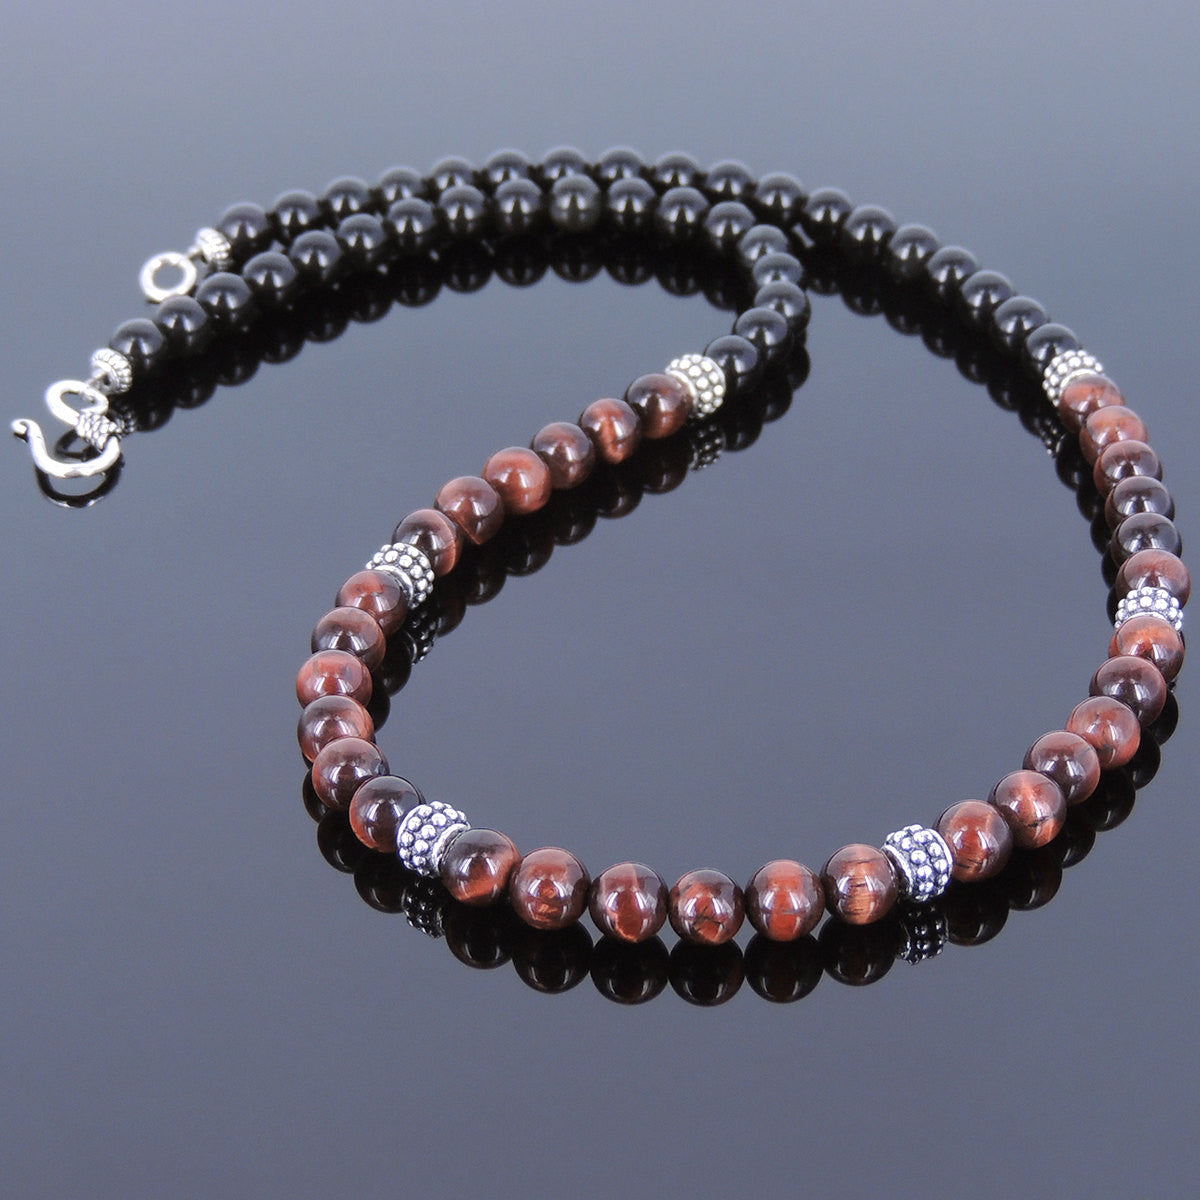 6mm Red Tiger Eye & Rainbow Black Obsidian Healing Stone Necklace with S925 Sterling Silver Spacer Beads & S-Hook Clasp - Handmade by Gem & Silver NK092